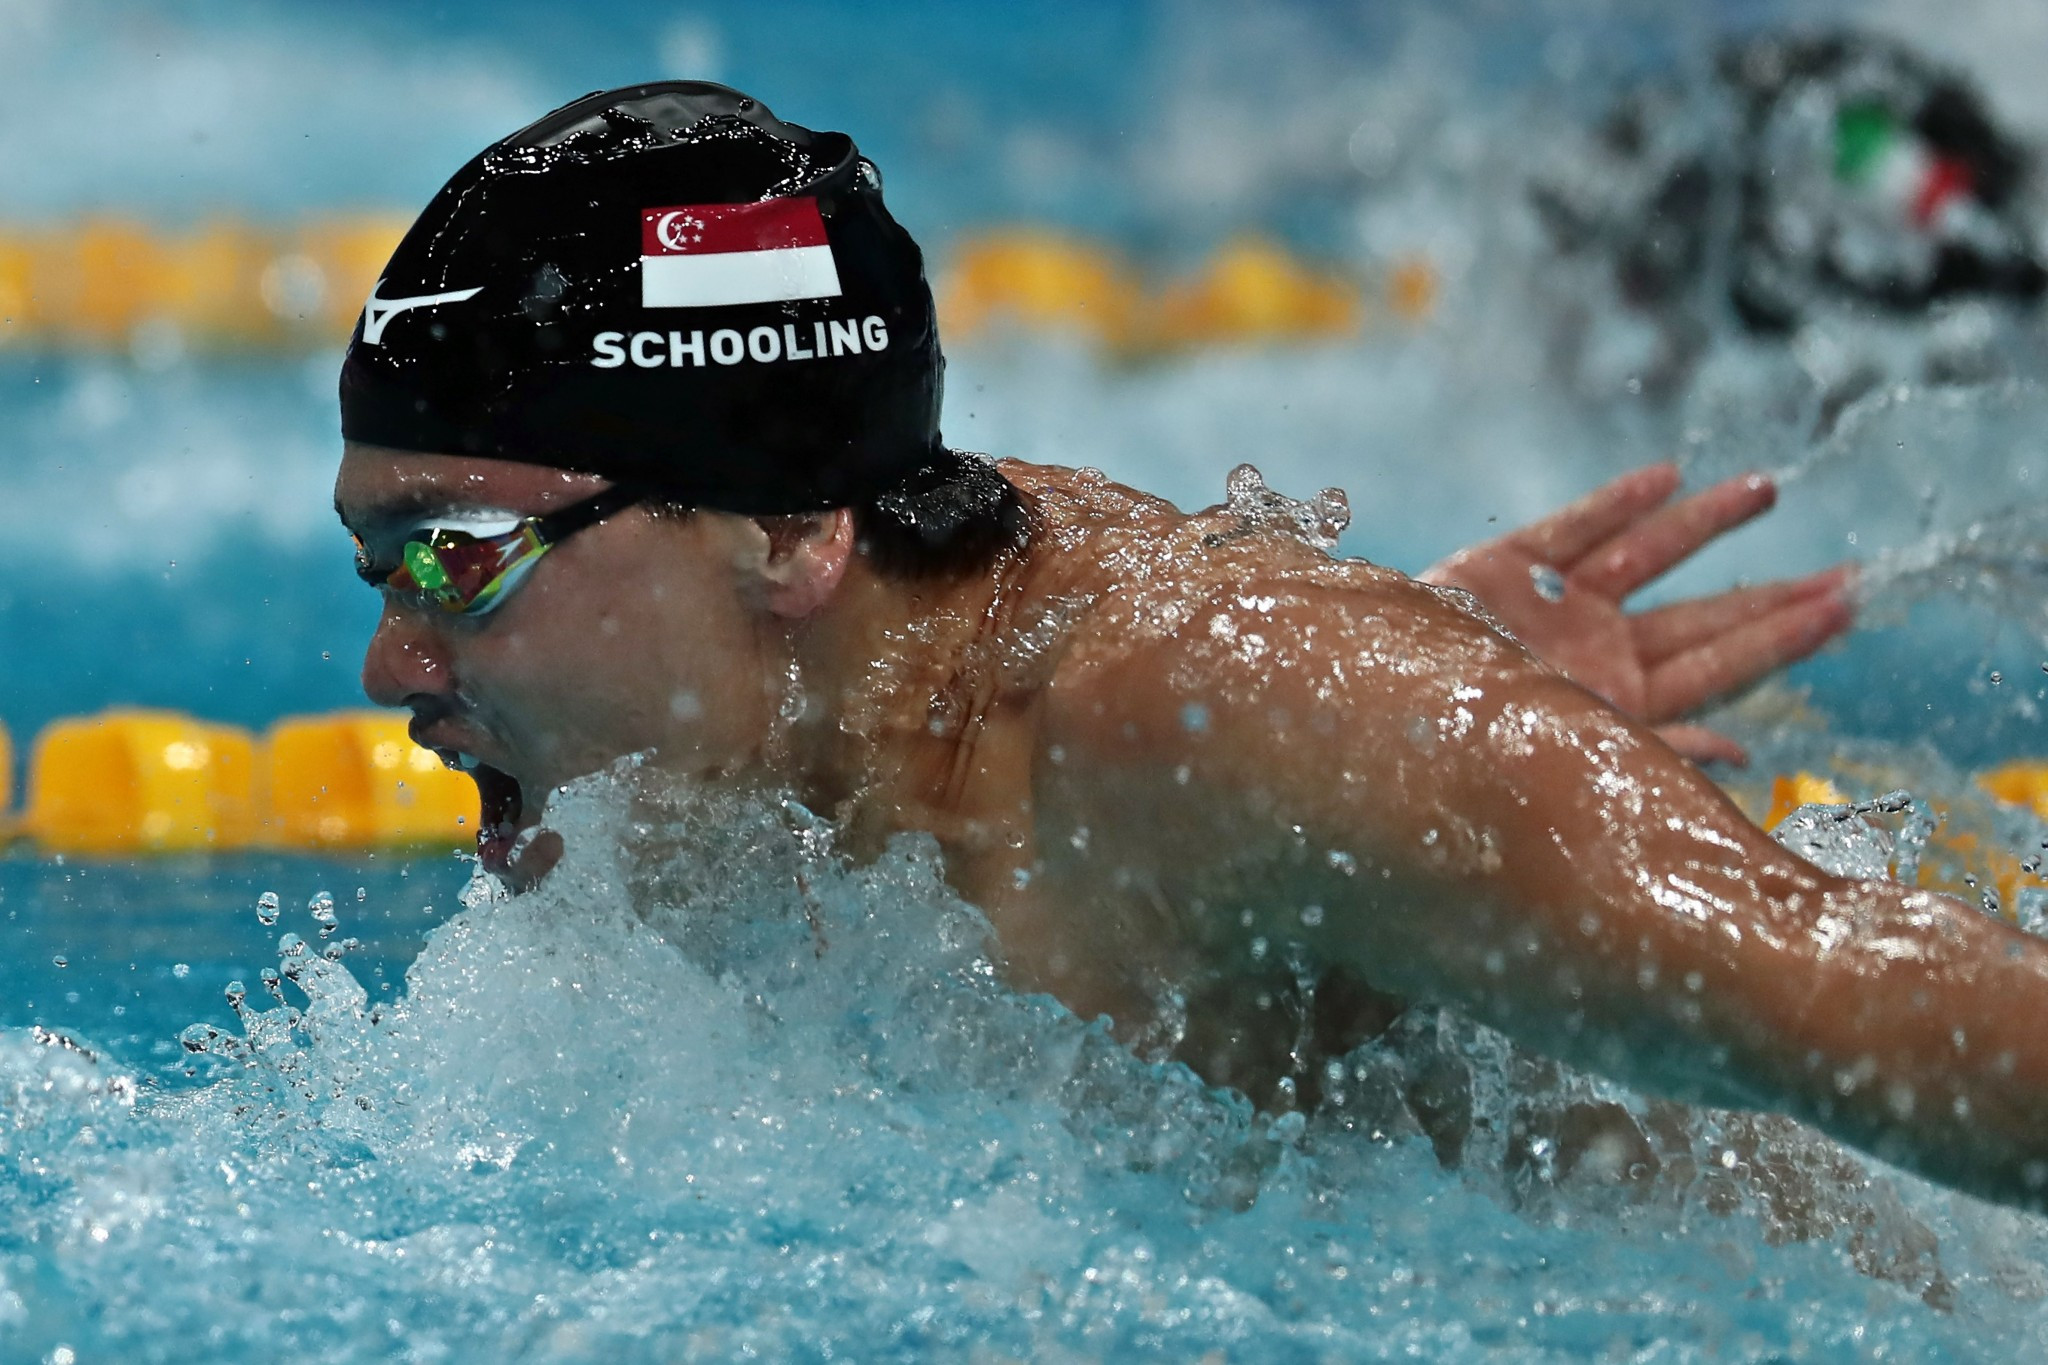 Joseph Schooling is the reigning Olympic champion in the men's 100m butterfly ©Getty Images